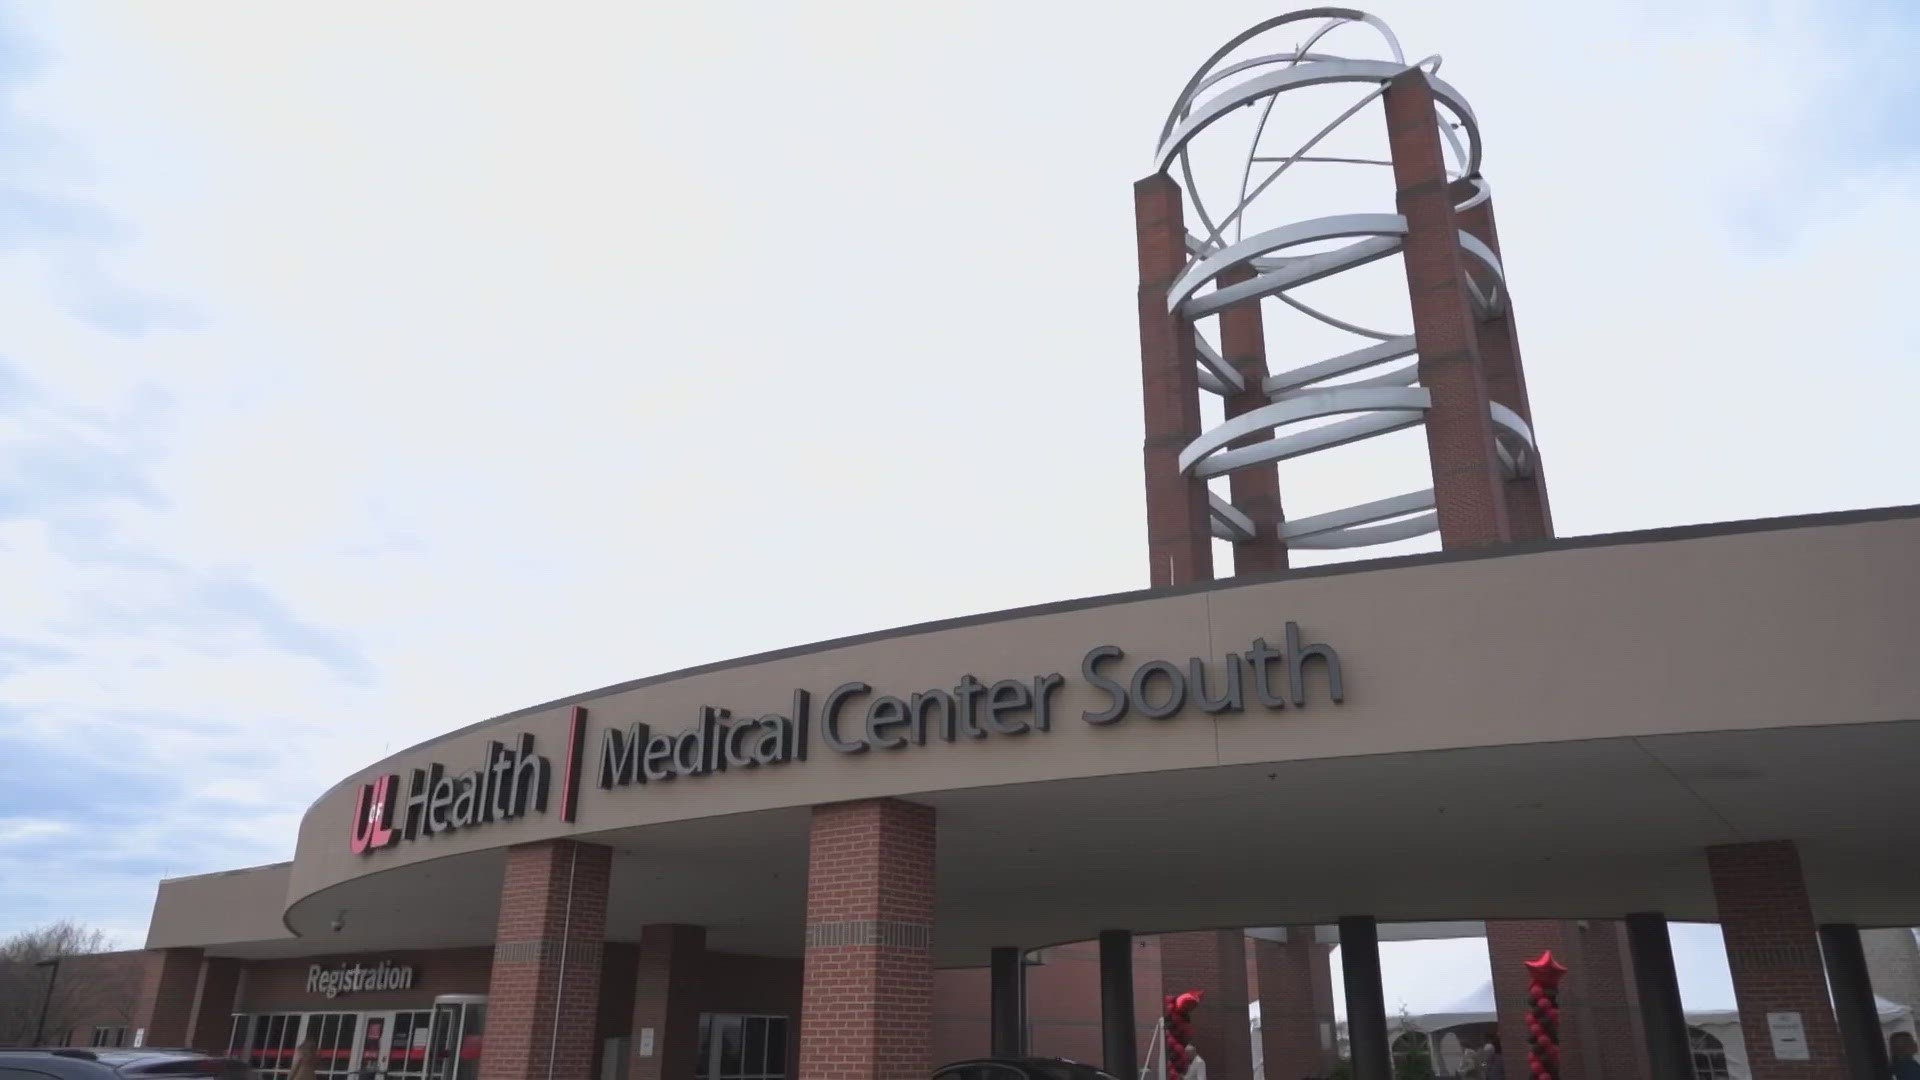 Before Monday, Bullitt County was the largest county in Kentucky without an inpatient hospital.